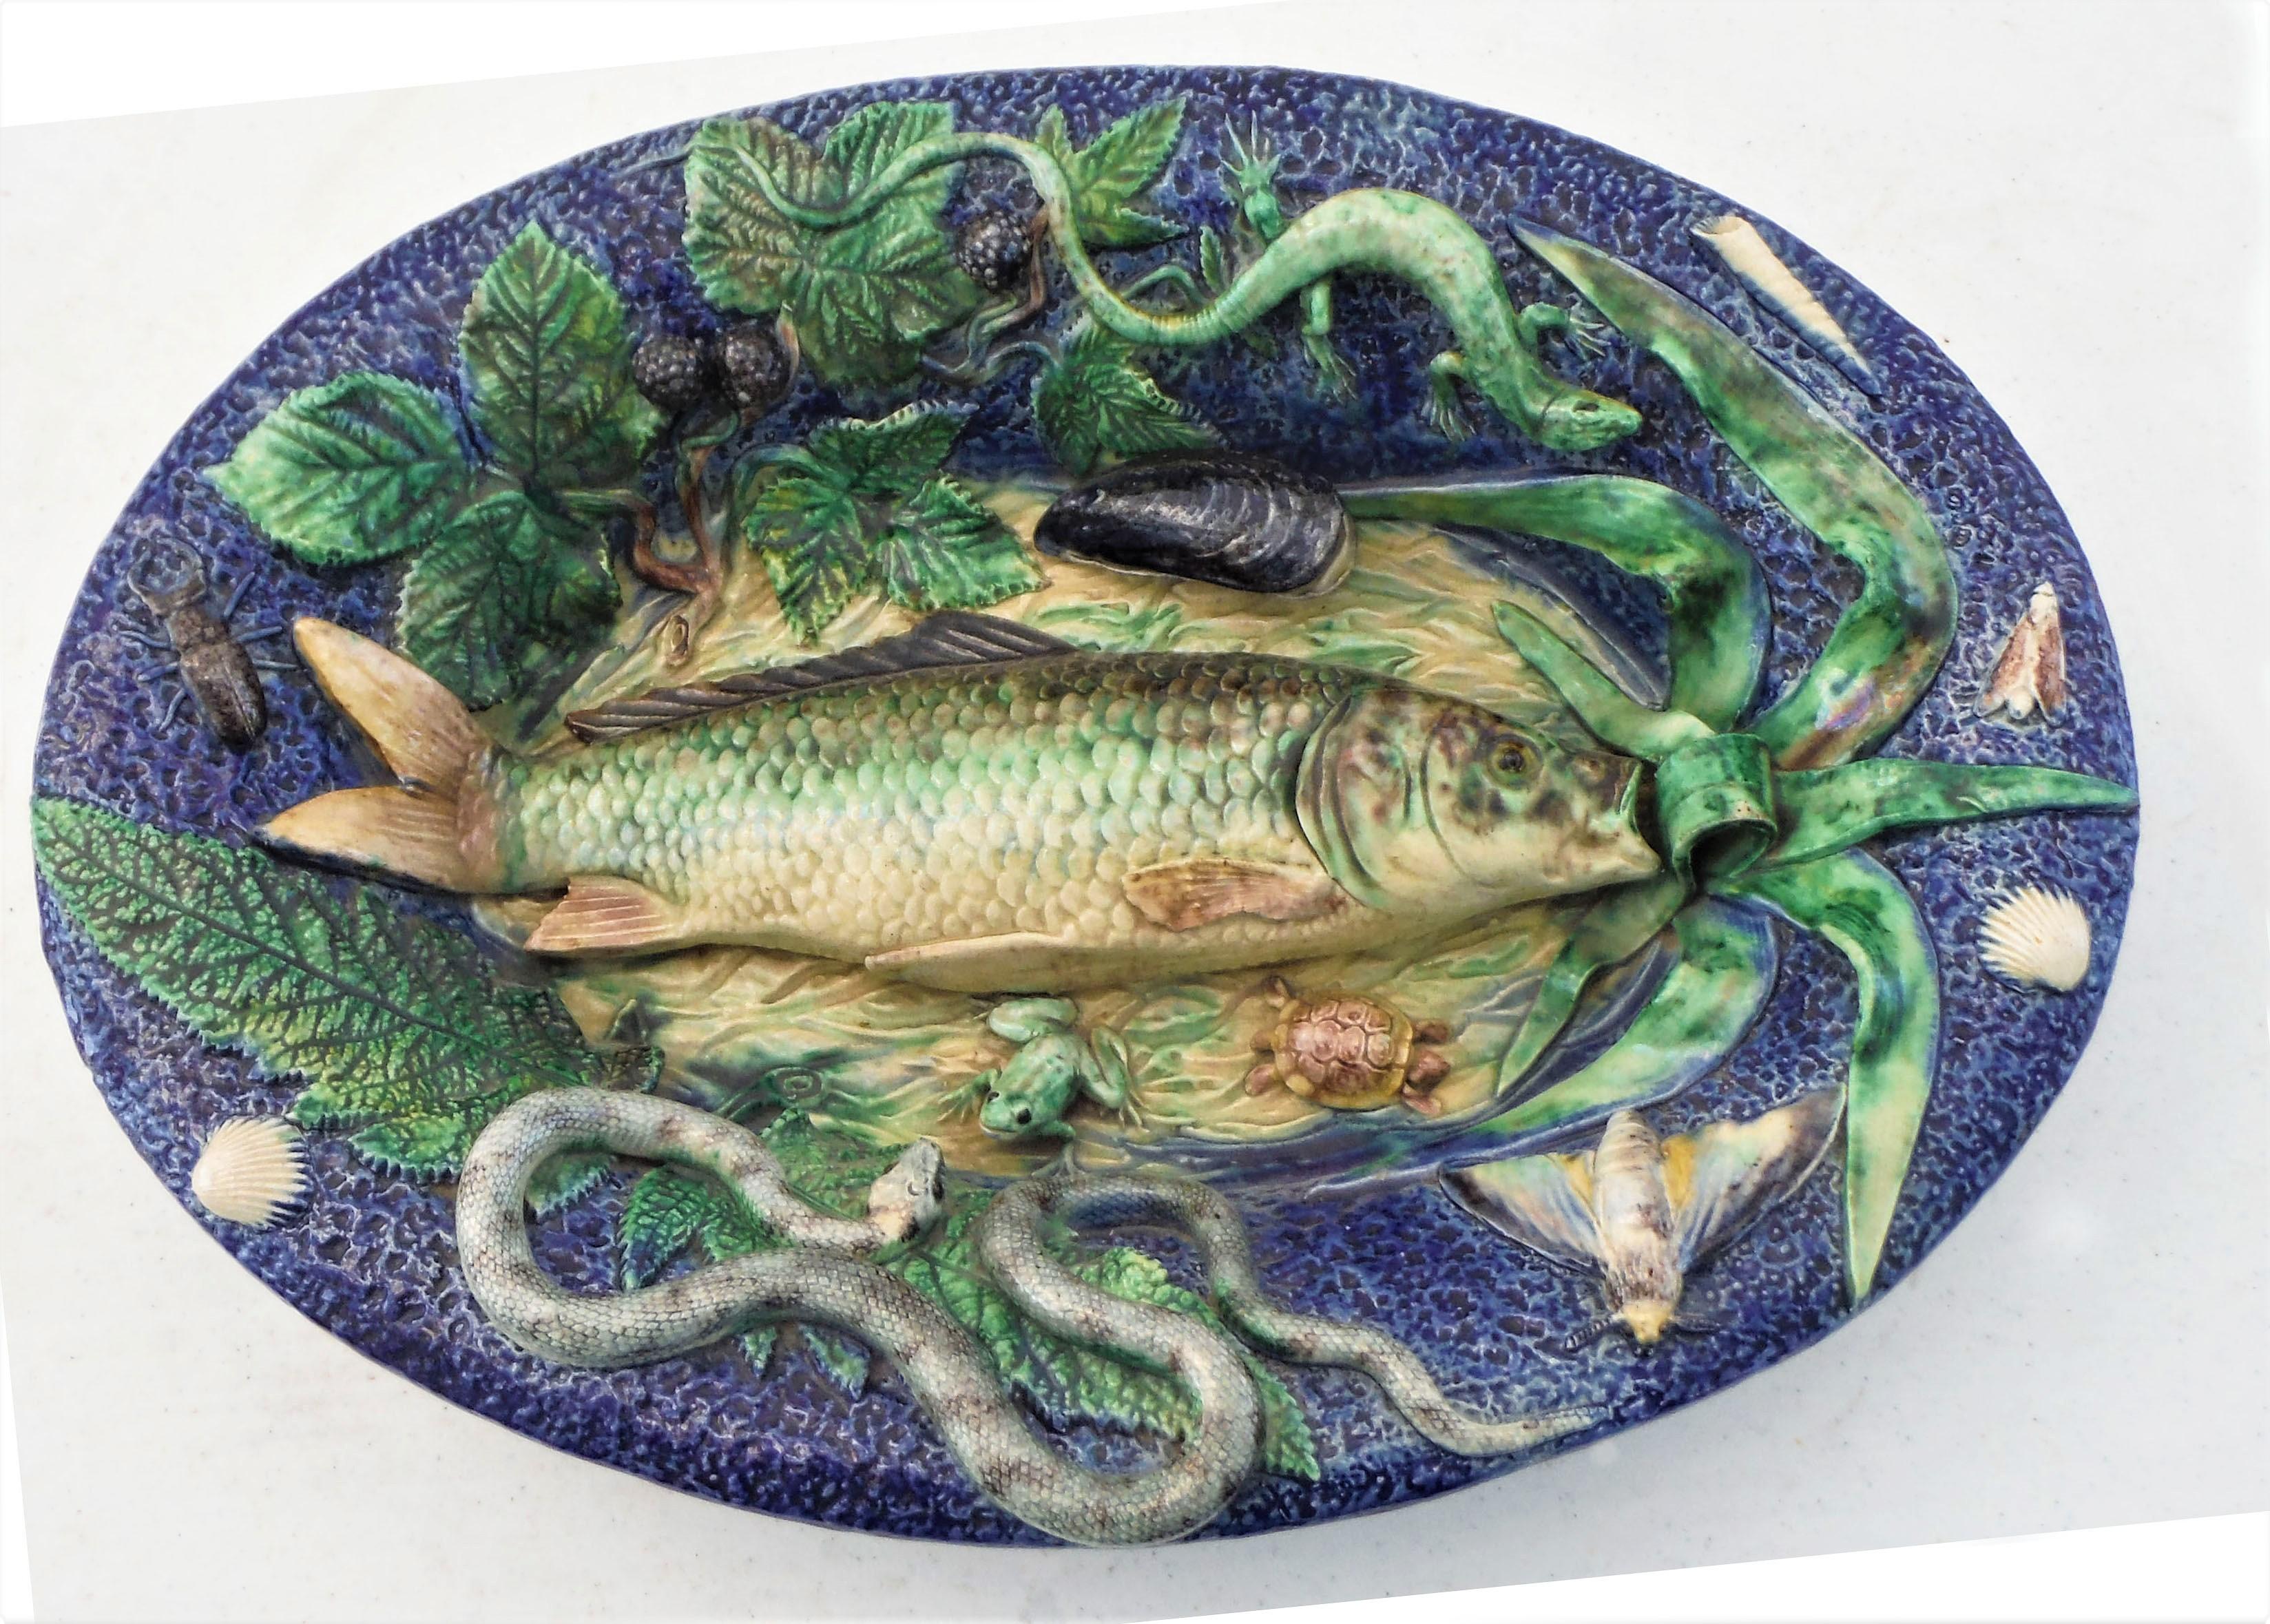 A large Palissy fish platter in a basin form from the School of Paris, circa 1875 with a large fish on the center surrounded by a lizard, a turtle, a frog, a snake, some bugs, shells, a large mussel, green leaves and blackberries.
Attribution to